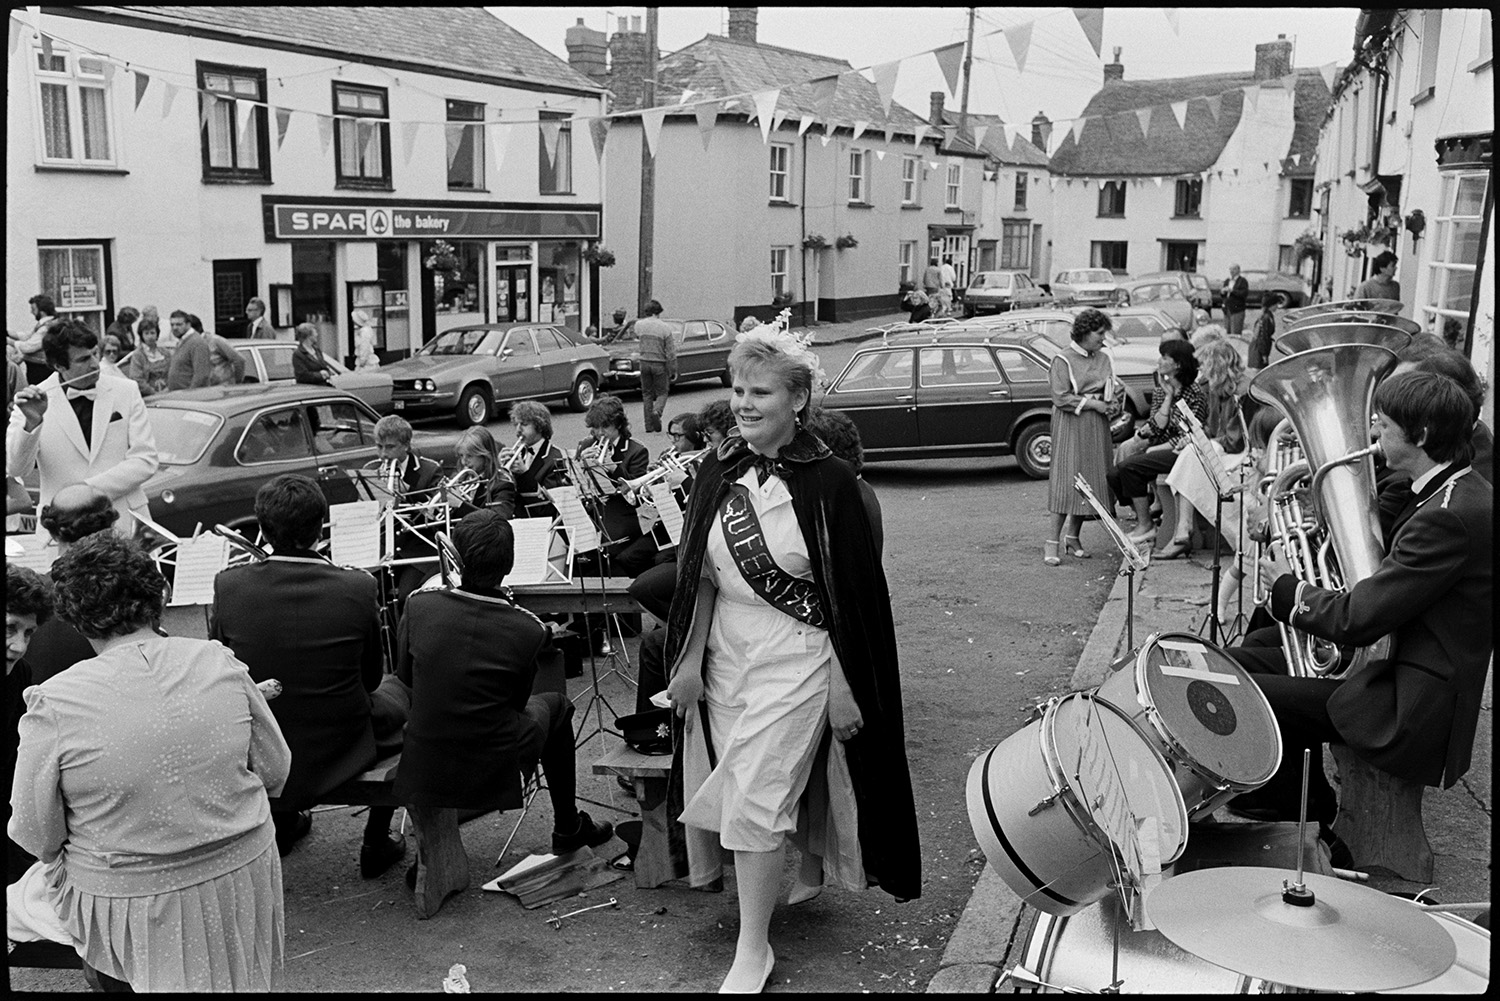 Fair Queen and attendants in village square, spectators waiting around. Photographer. 
[The Winkleigh Fair Queen walking through Winkleigh village square past a bras band. The conductor of the band is visible in the background. Thatched cottages, parked cars and the Spar shop are visible in the street which is decorated with bunting.]